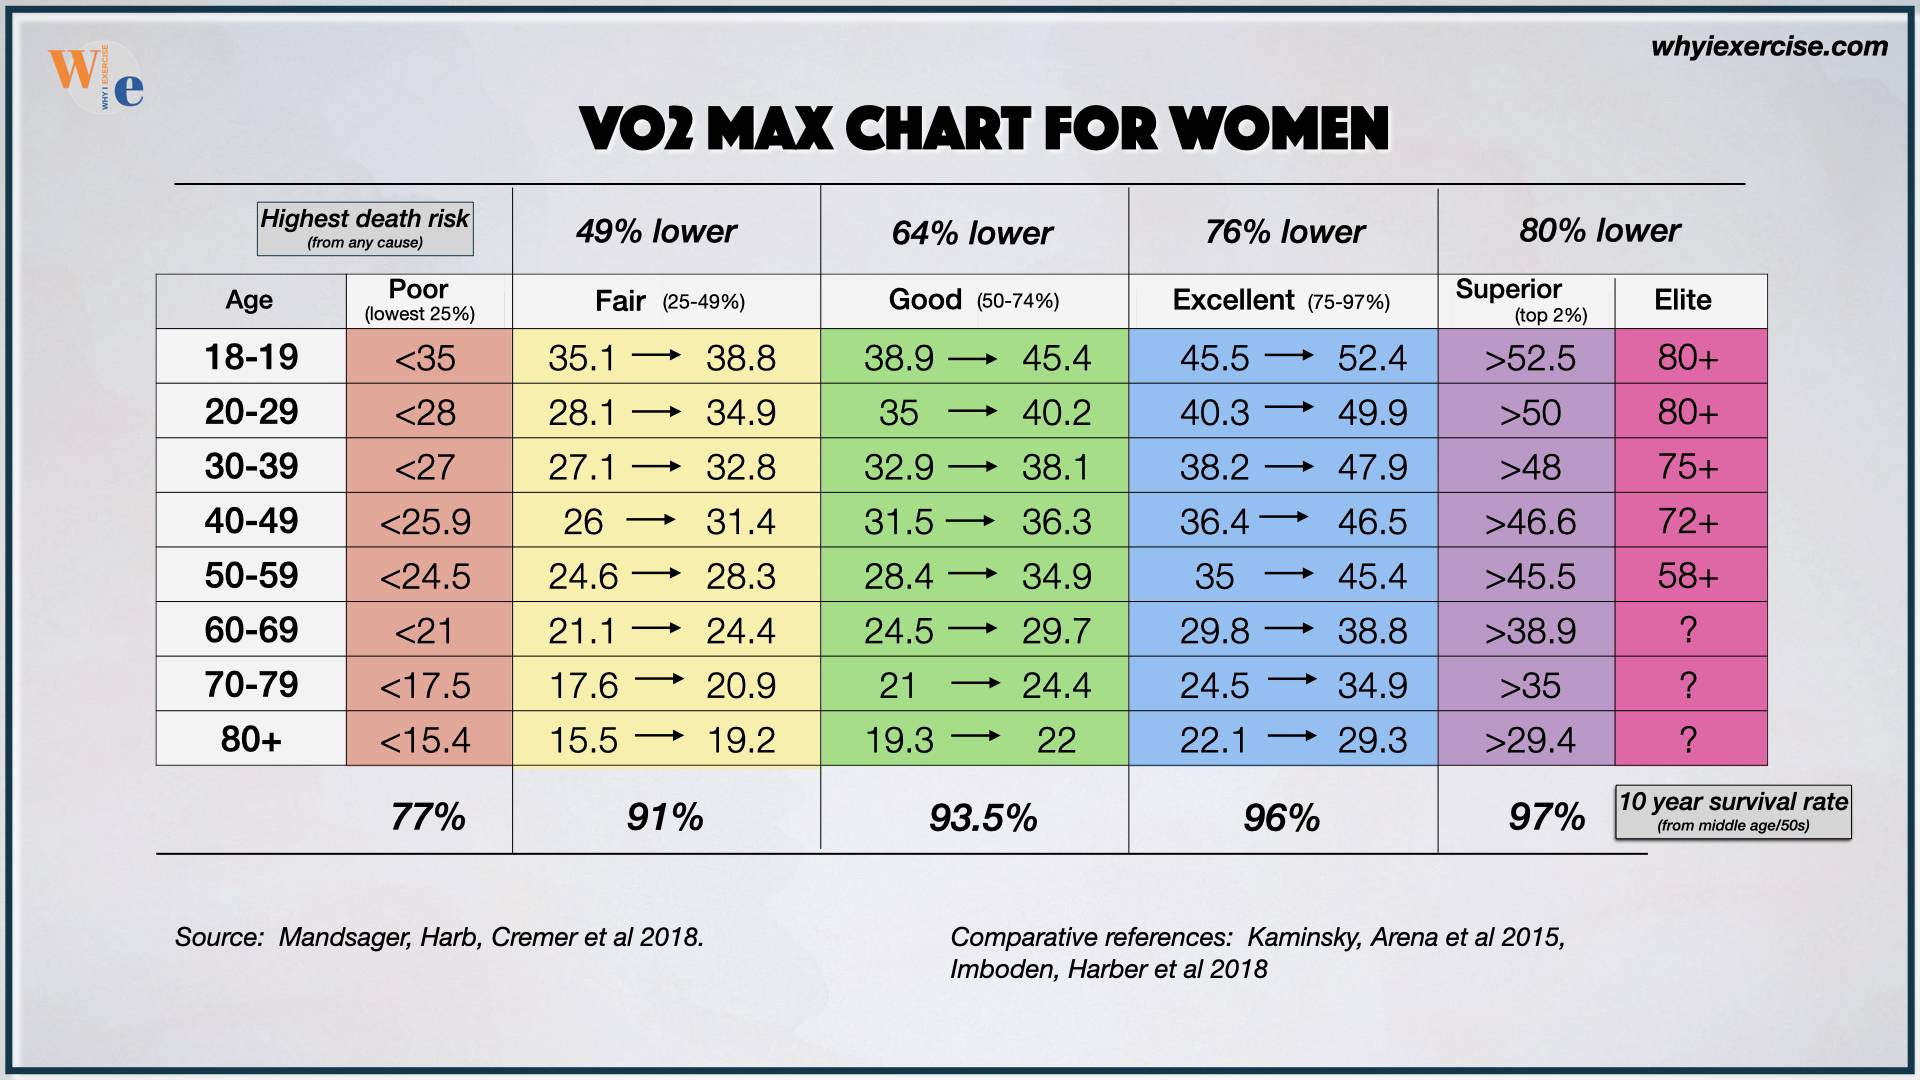 https://www.whyiexercise.com/images/xVO2-max-chart-for-women-by-age-group.jpg.pagespeed.ic.BRFe7nho9F.jpg